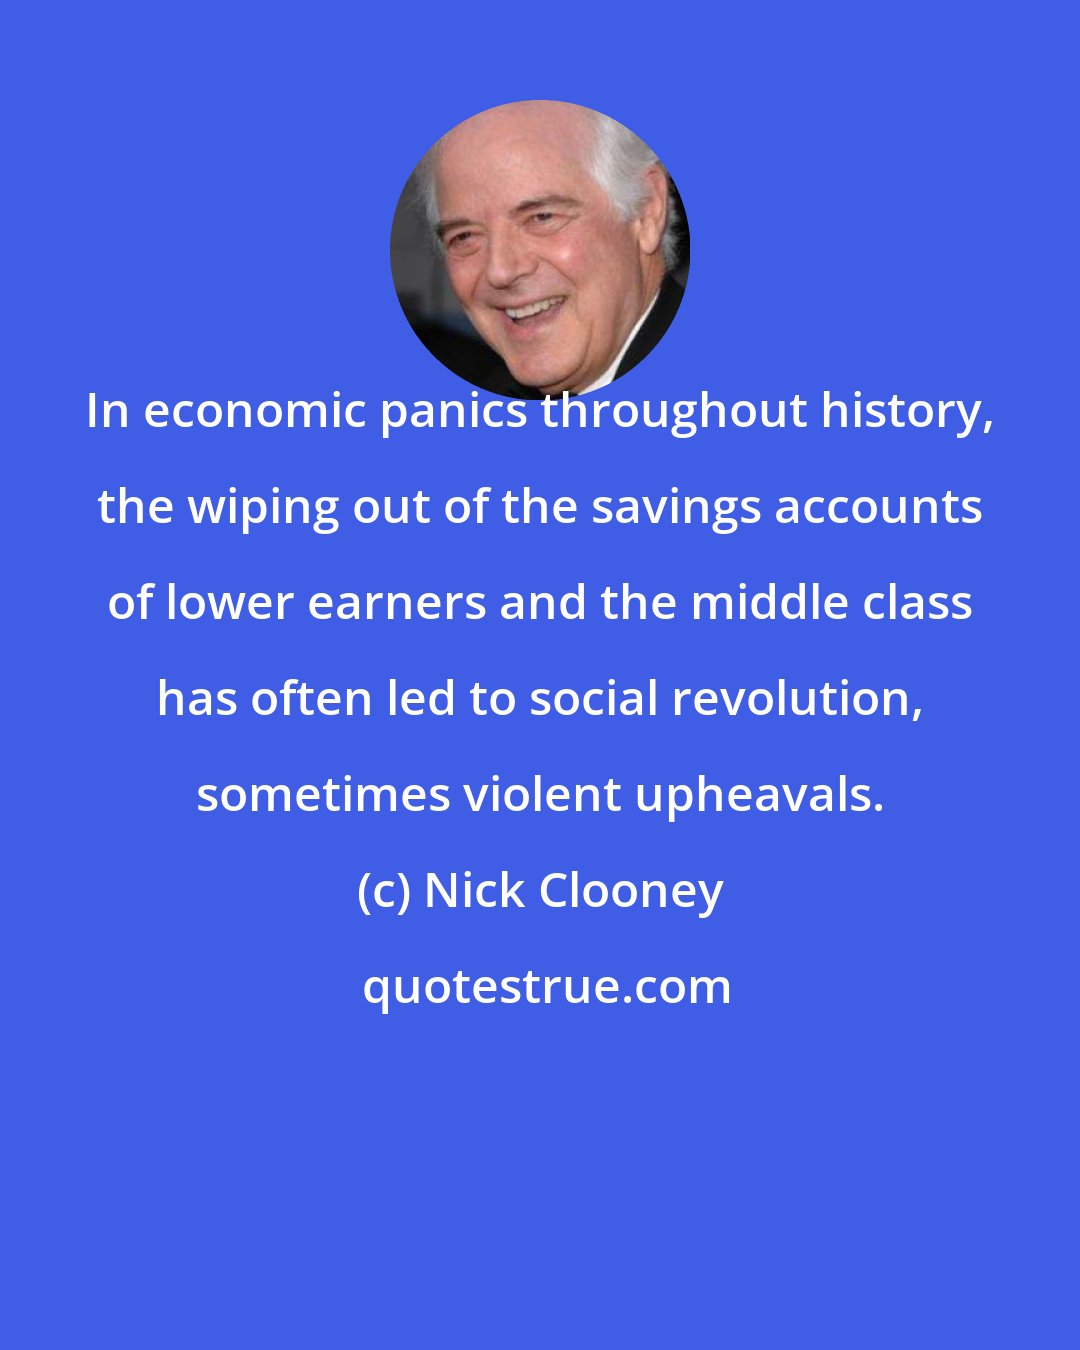 Nick Clooney: In economic panics throughout history, the wiping out of the savings accounts of lower earners and the middle class has often led to social revolution, sometimes violent upheavals.